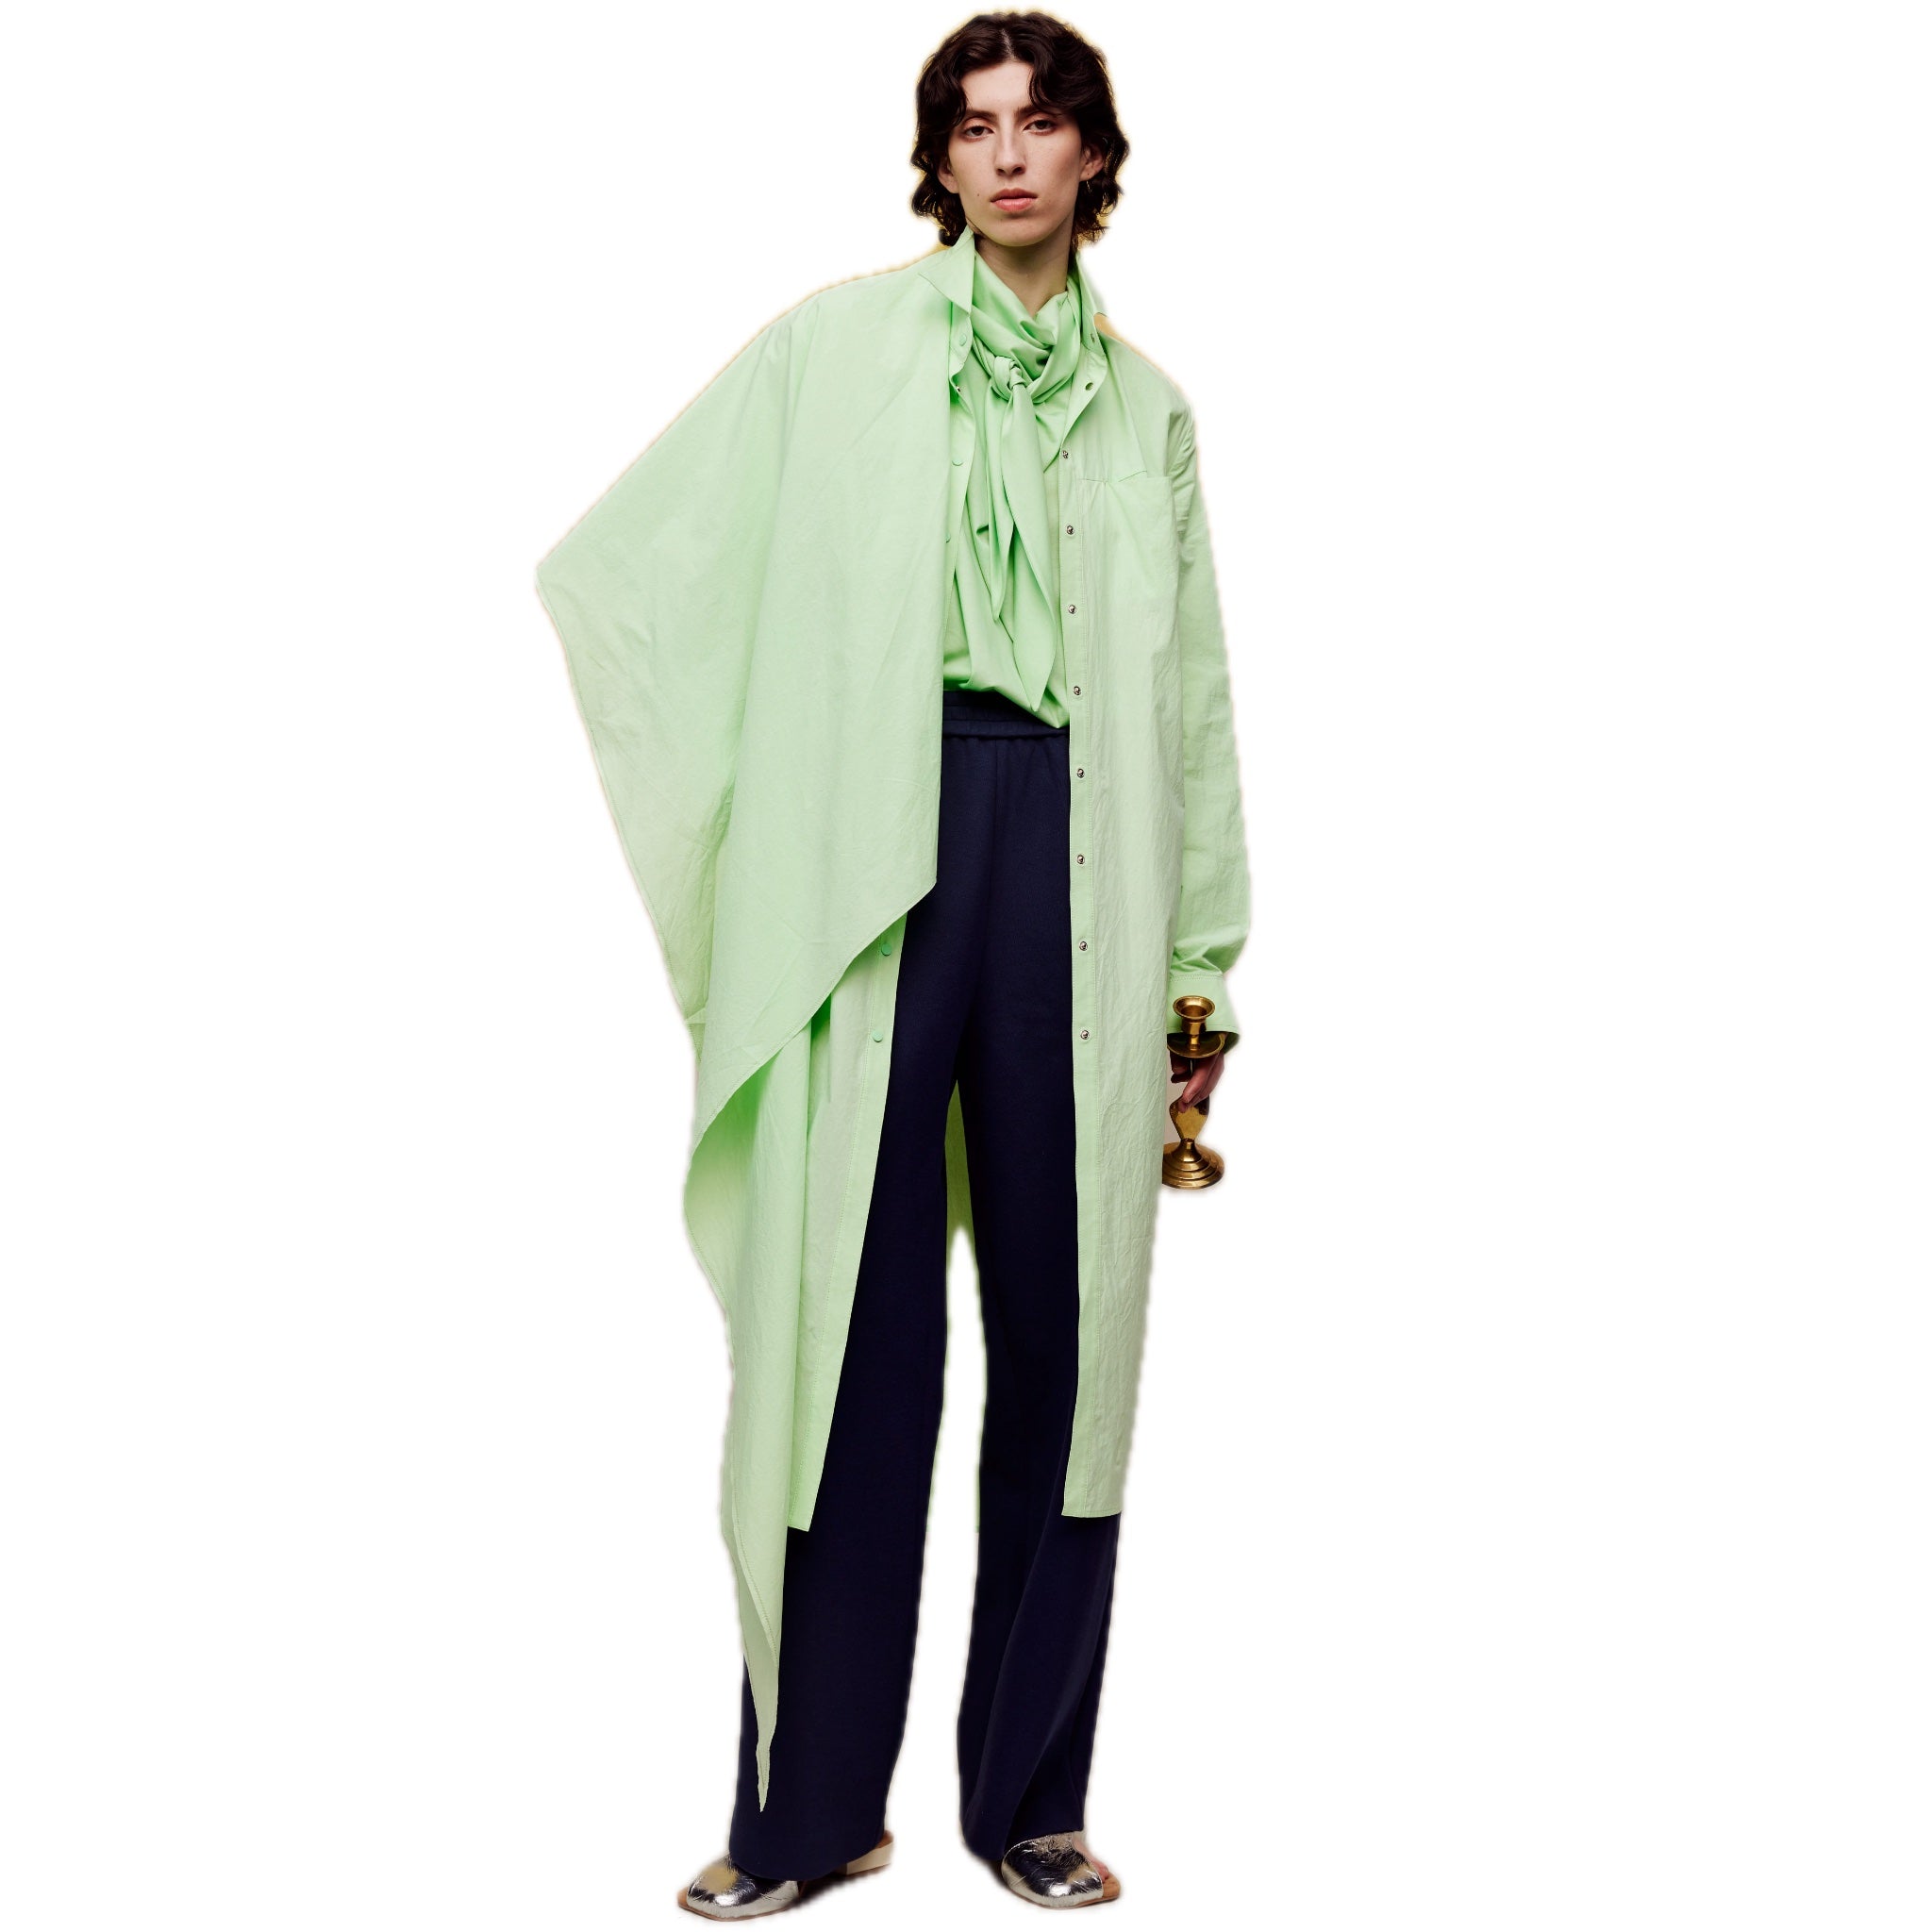 ilEWUOY Wrinkled Cotton Scarf Shirt Dress in Green | MADA IN CHINA